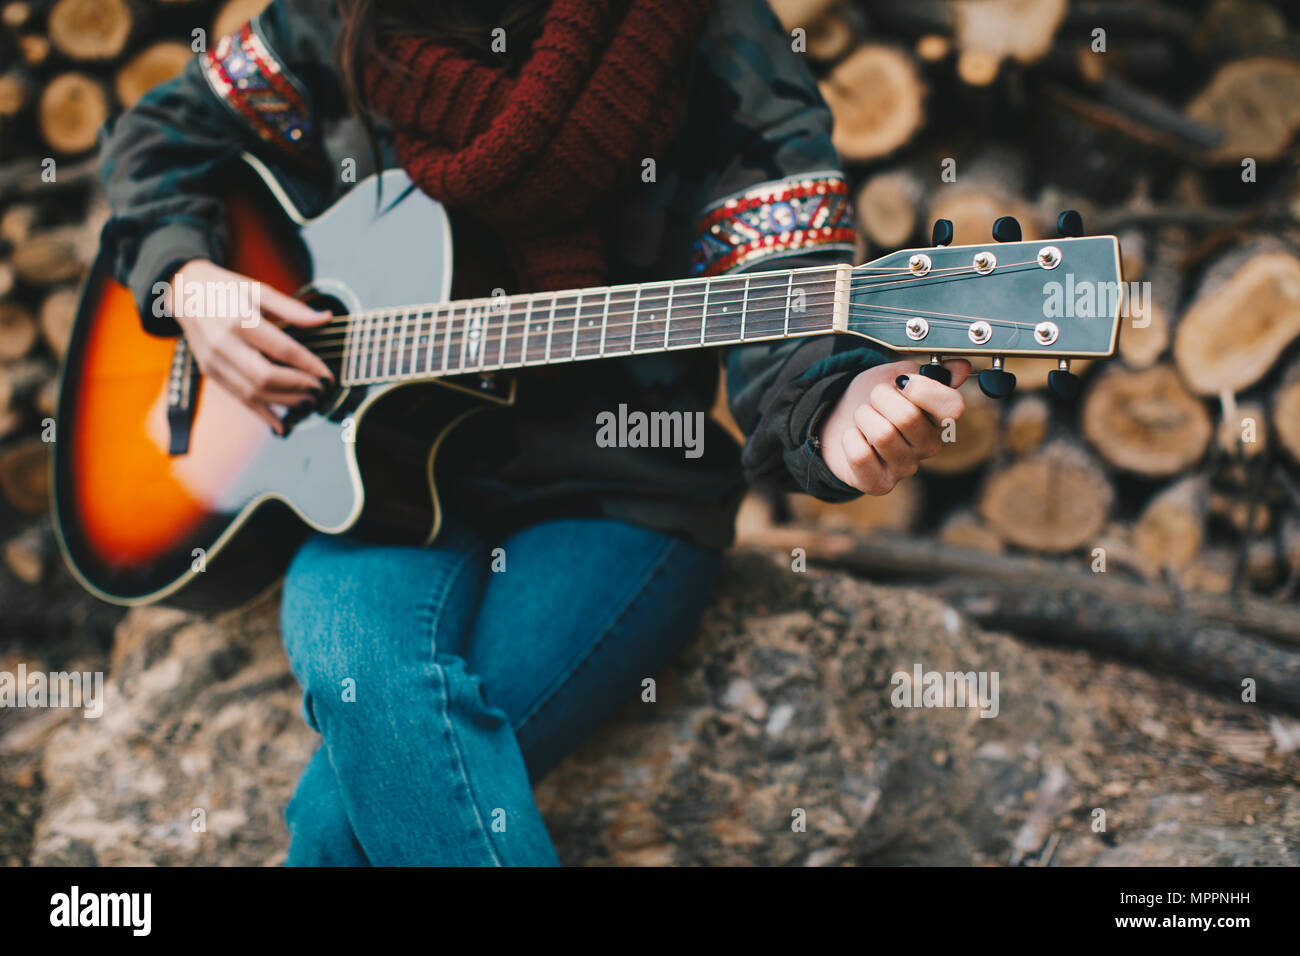 Young woman tuning guitar outdoors, partial view Stock Photo